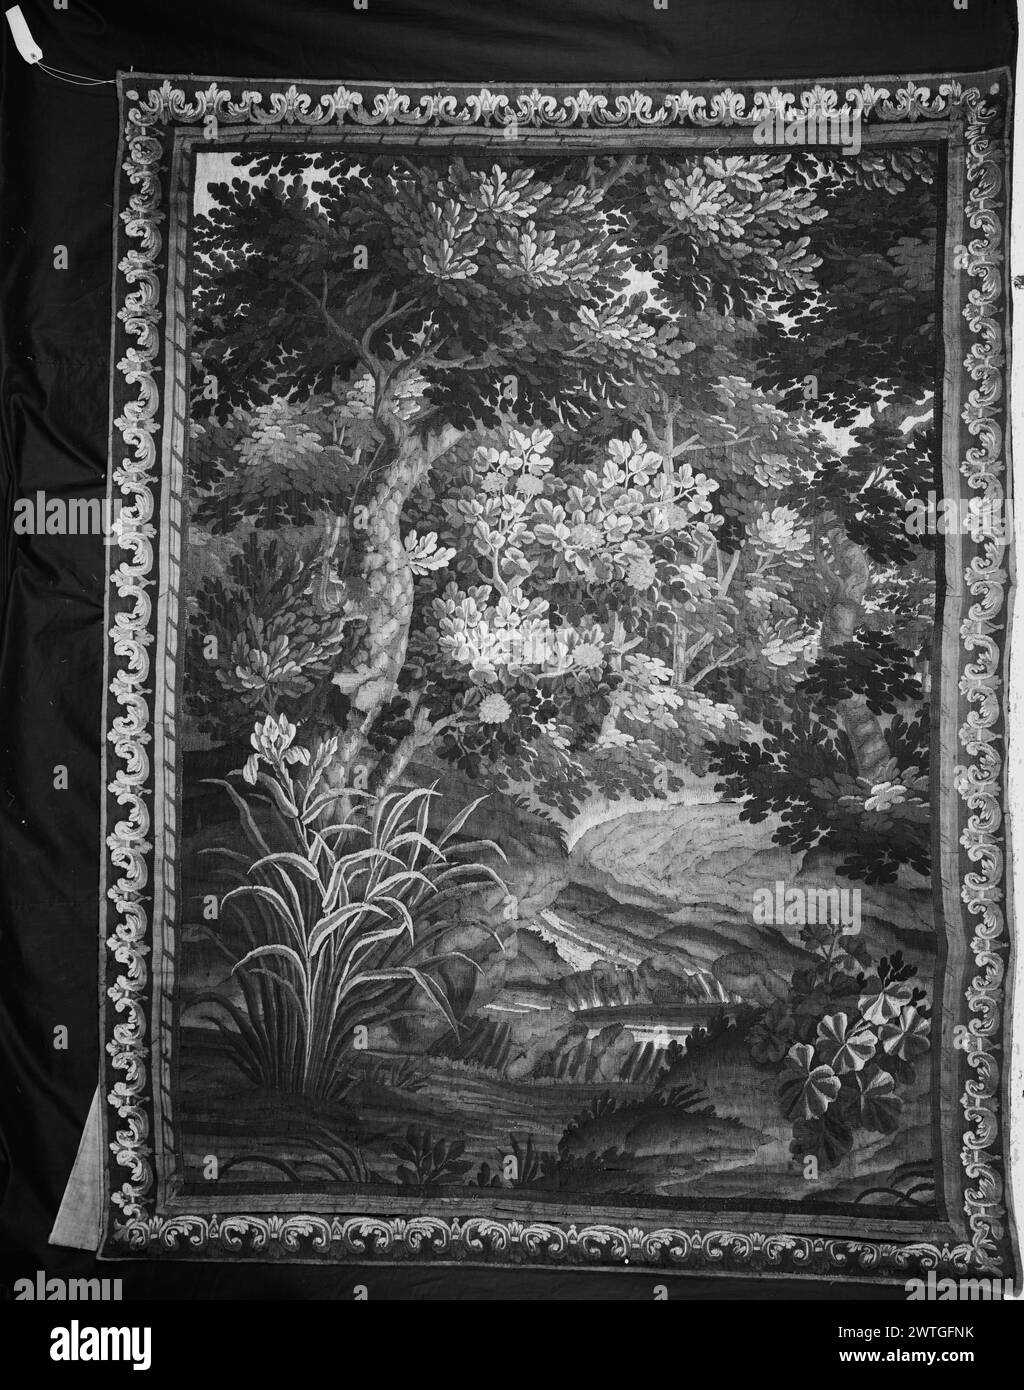 Landscape with iris in foreground. unknown c. 1670-1700 Tapestry Dimensions: H 8'7' x W 6'5' Tapestry Materials/Techniques: unknown Culture: Flemish Weaving Center: unknown Ownership History: French & Co. purchased from Mrs. Gaston Coblentz received 4/6/1949; sold to Mr. Sam Darsa 11/17/1961. Stock Photo